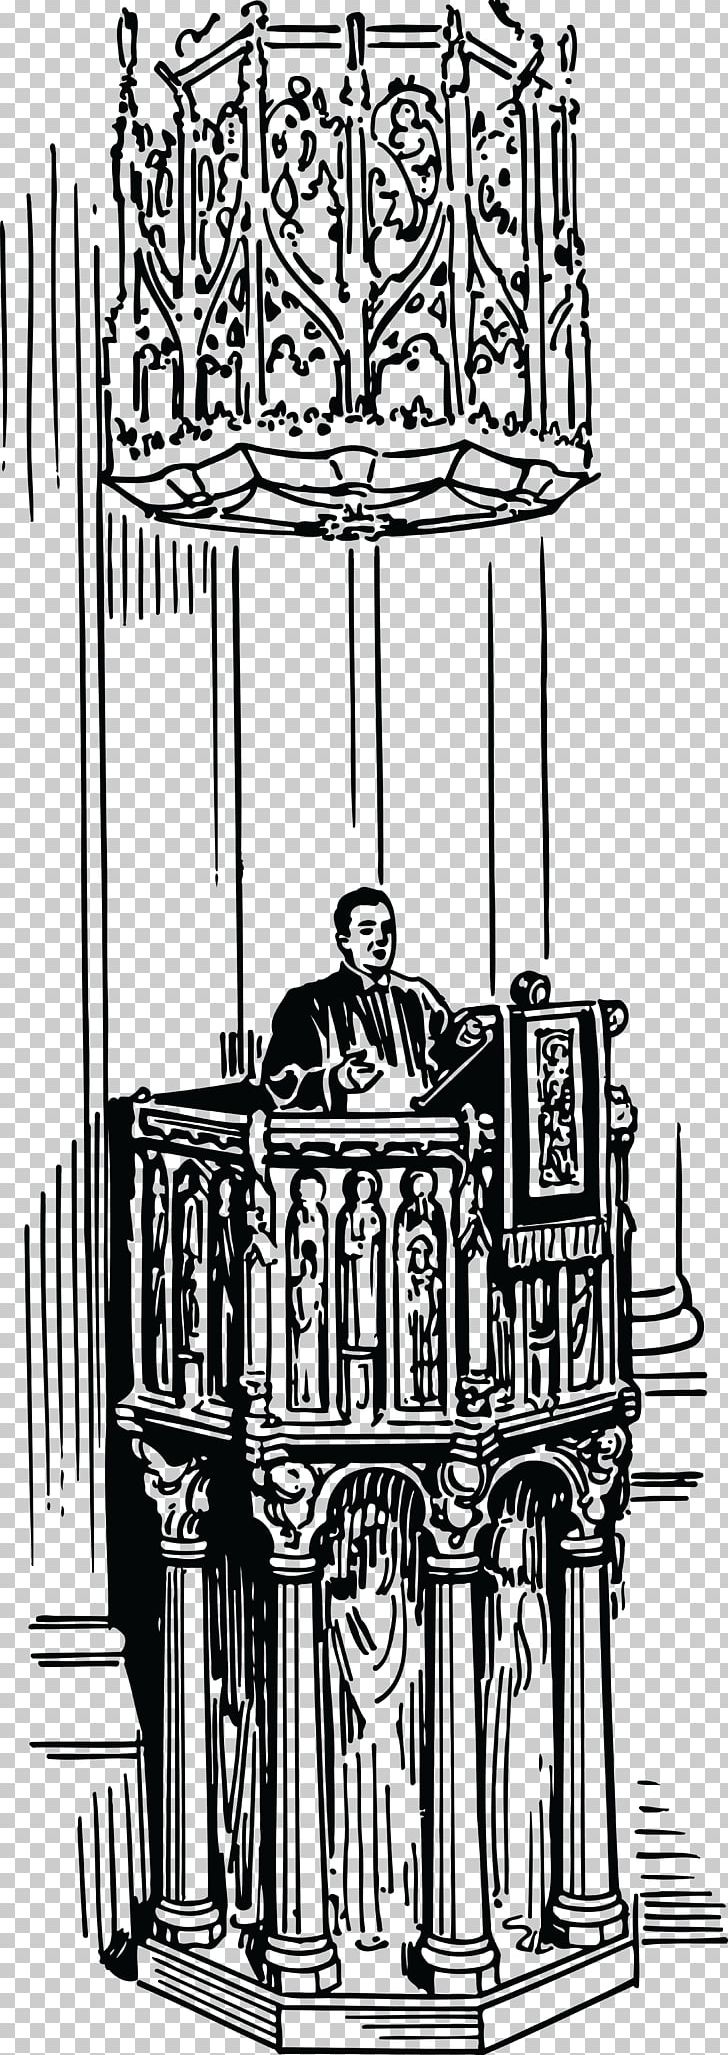 Bible Preacher Pulpit Clergy PNG, Clipart, Arch, Bible, Black And White, Christian Church, Christianity Free PNG Download